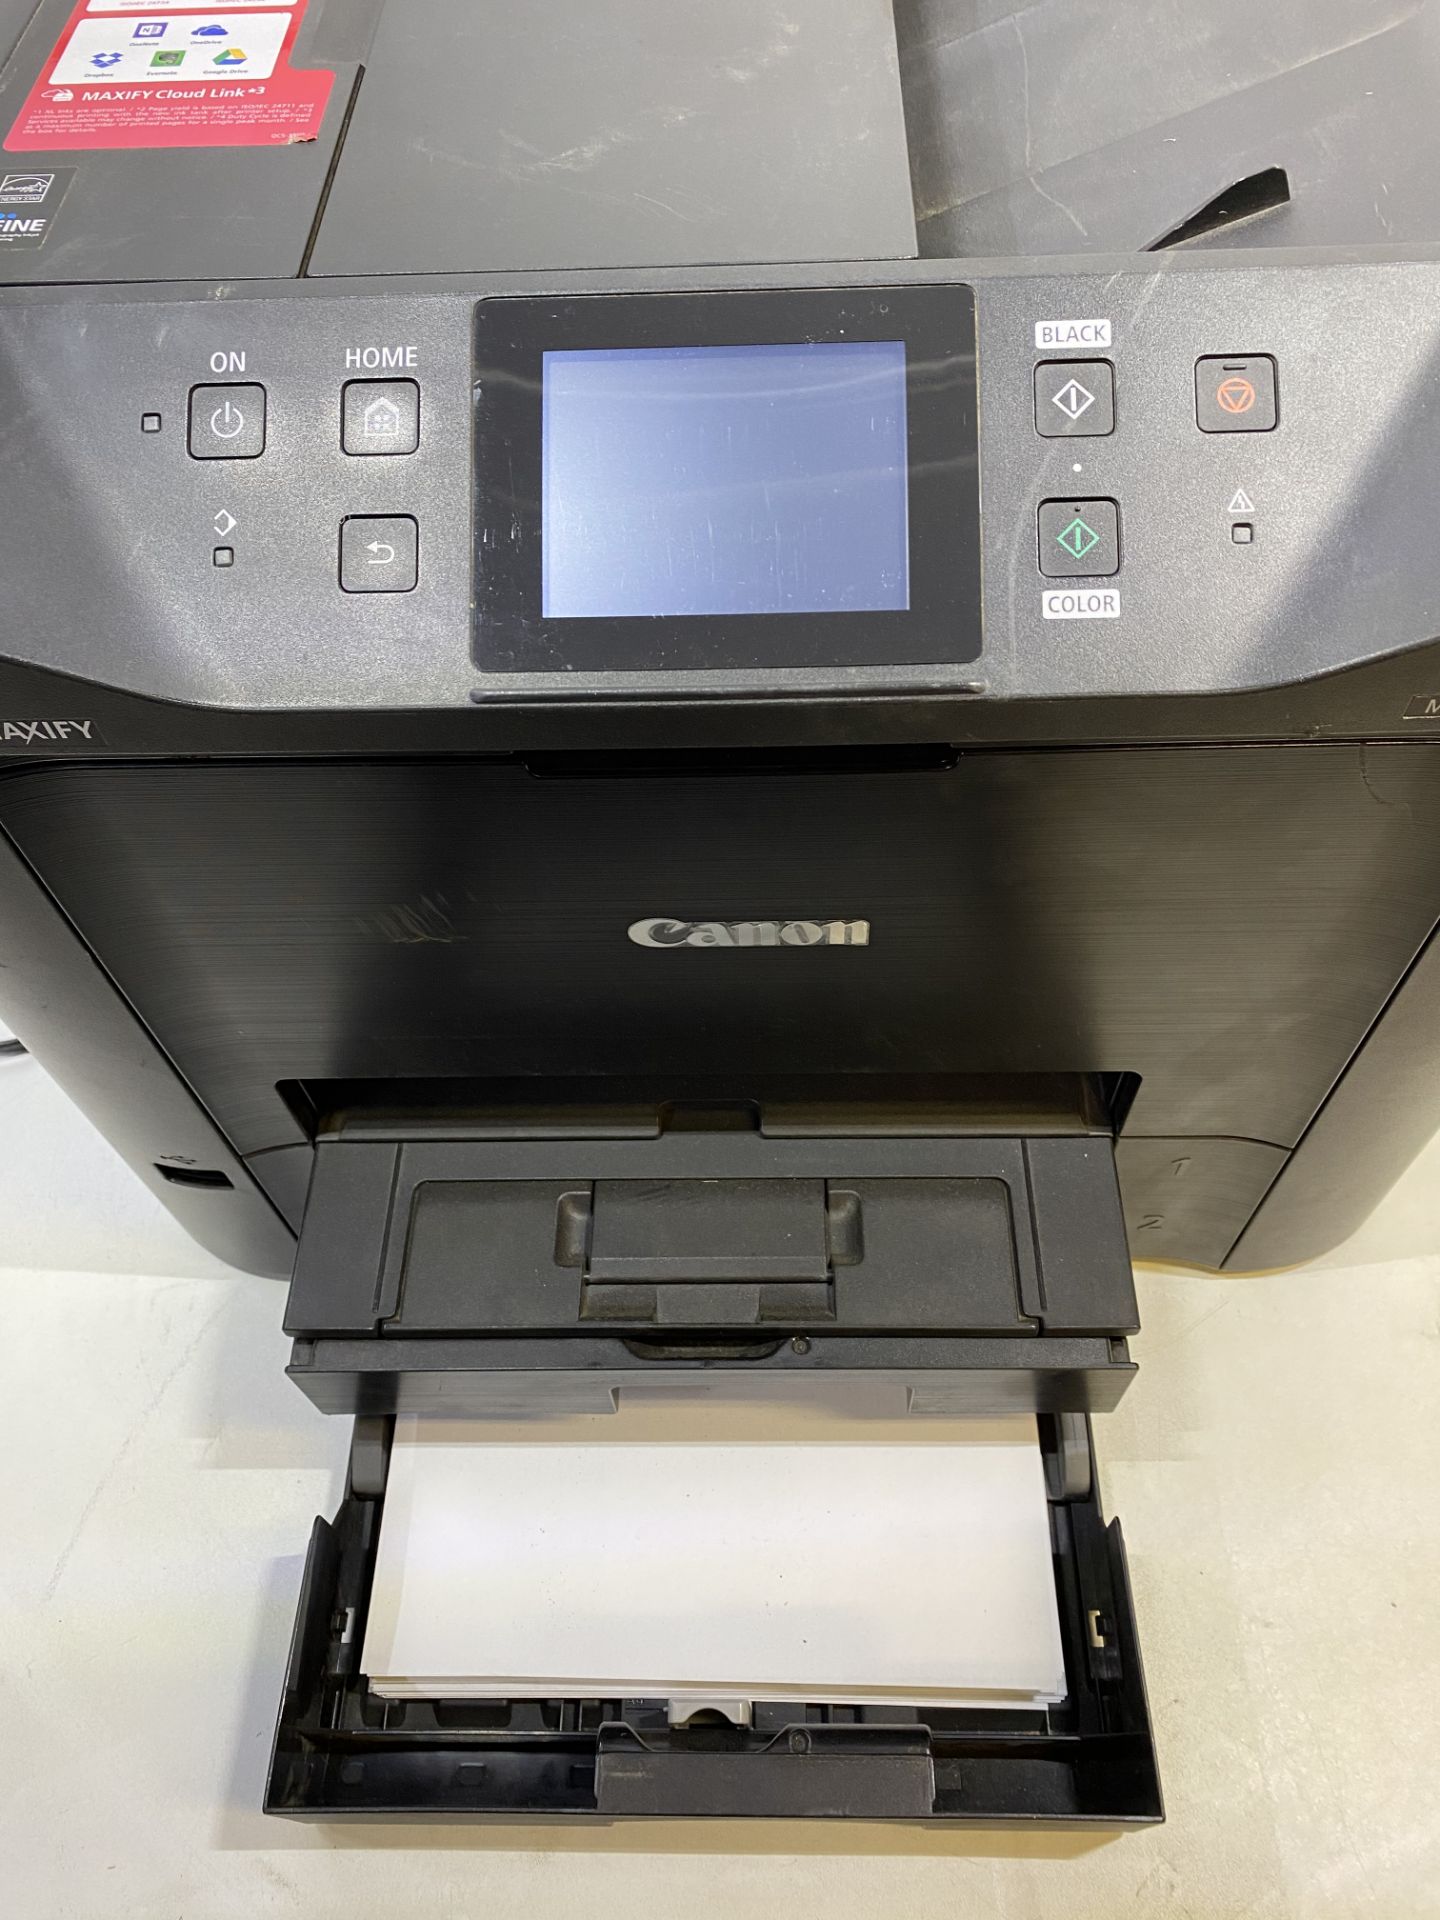 Canon MB5455 Multi-Functional Printer/Copier - Image 4 of 9